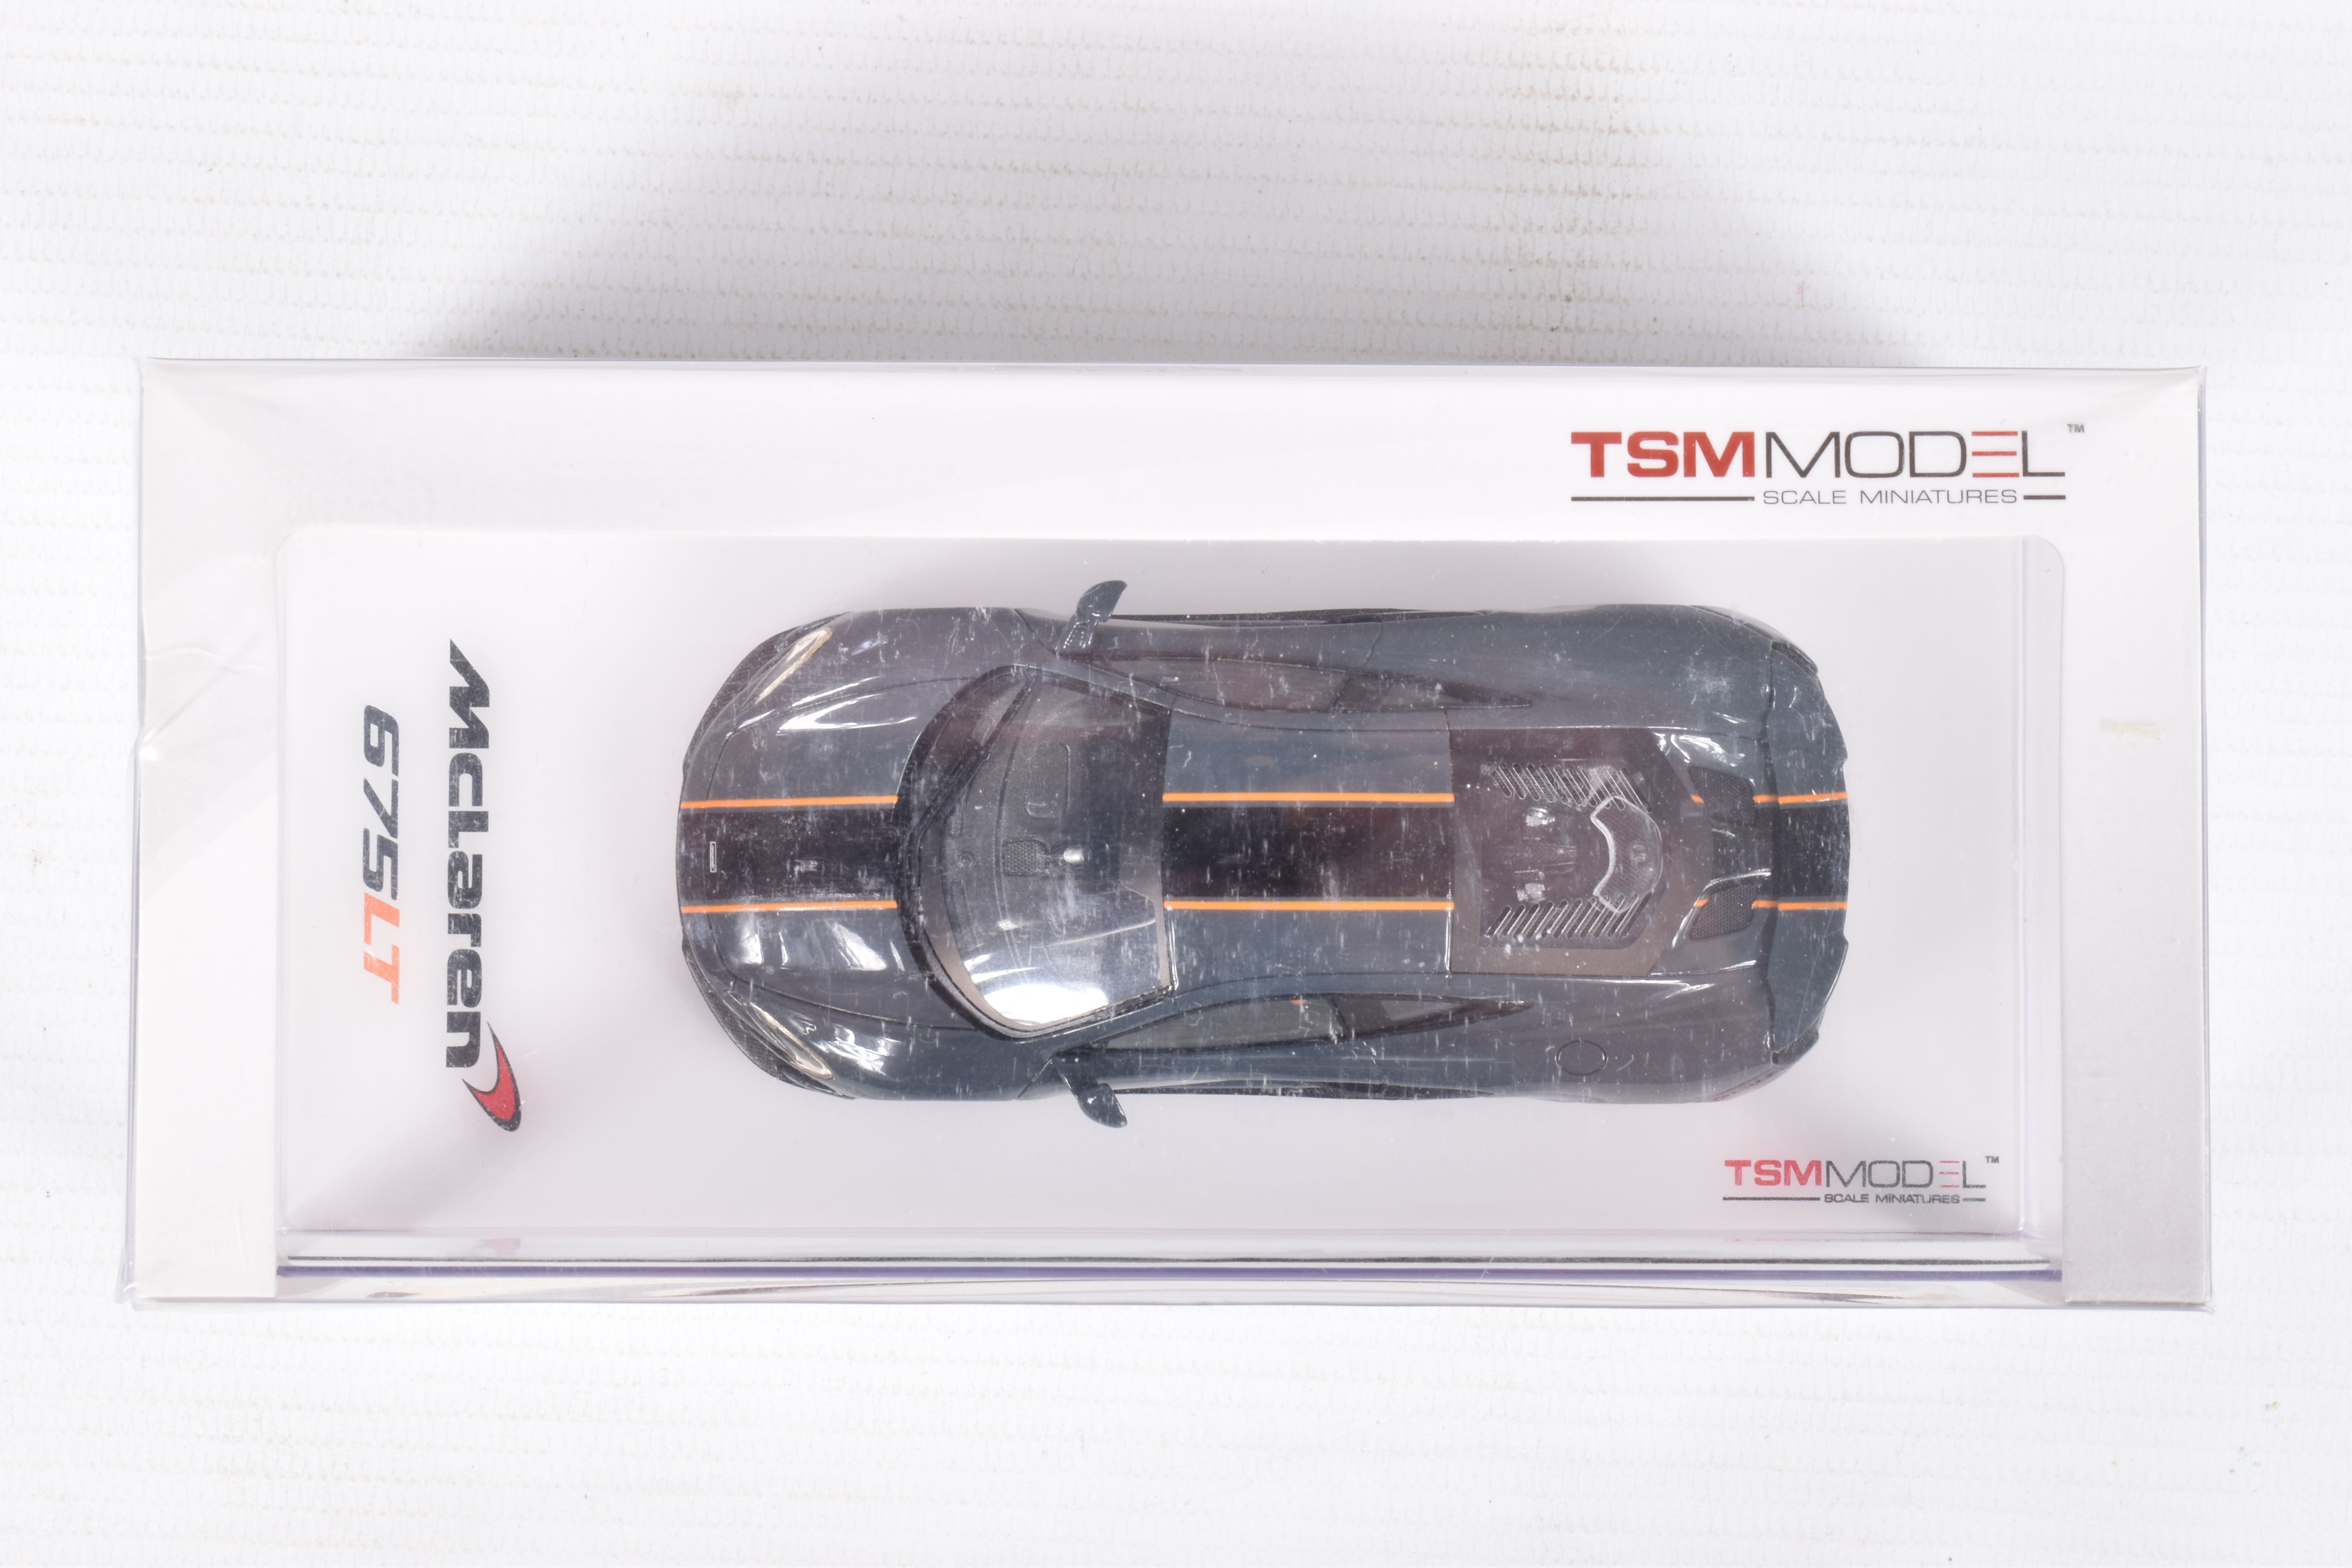 FIVE BOXED MCLAREN 1:43 SCALE MODELS to include a Welly McLaren GT in Bronze, a McLaren GT 2019 in - Image 17 of 17